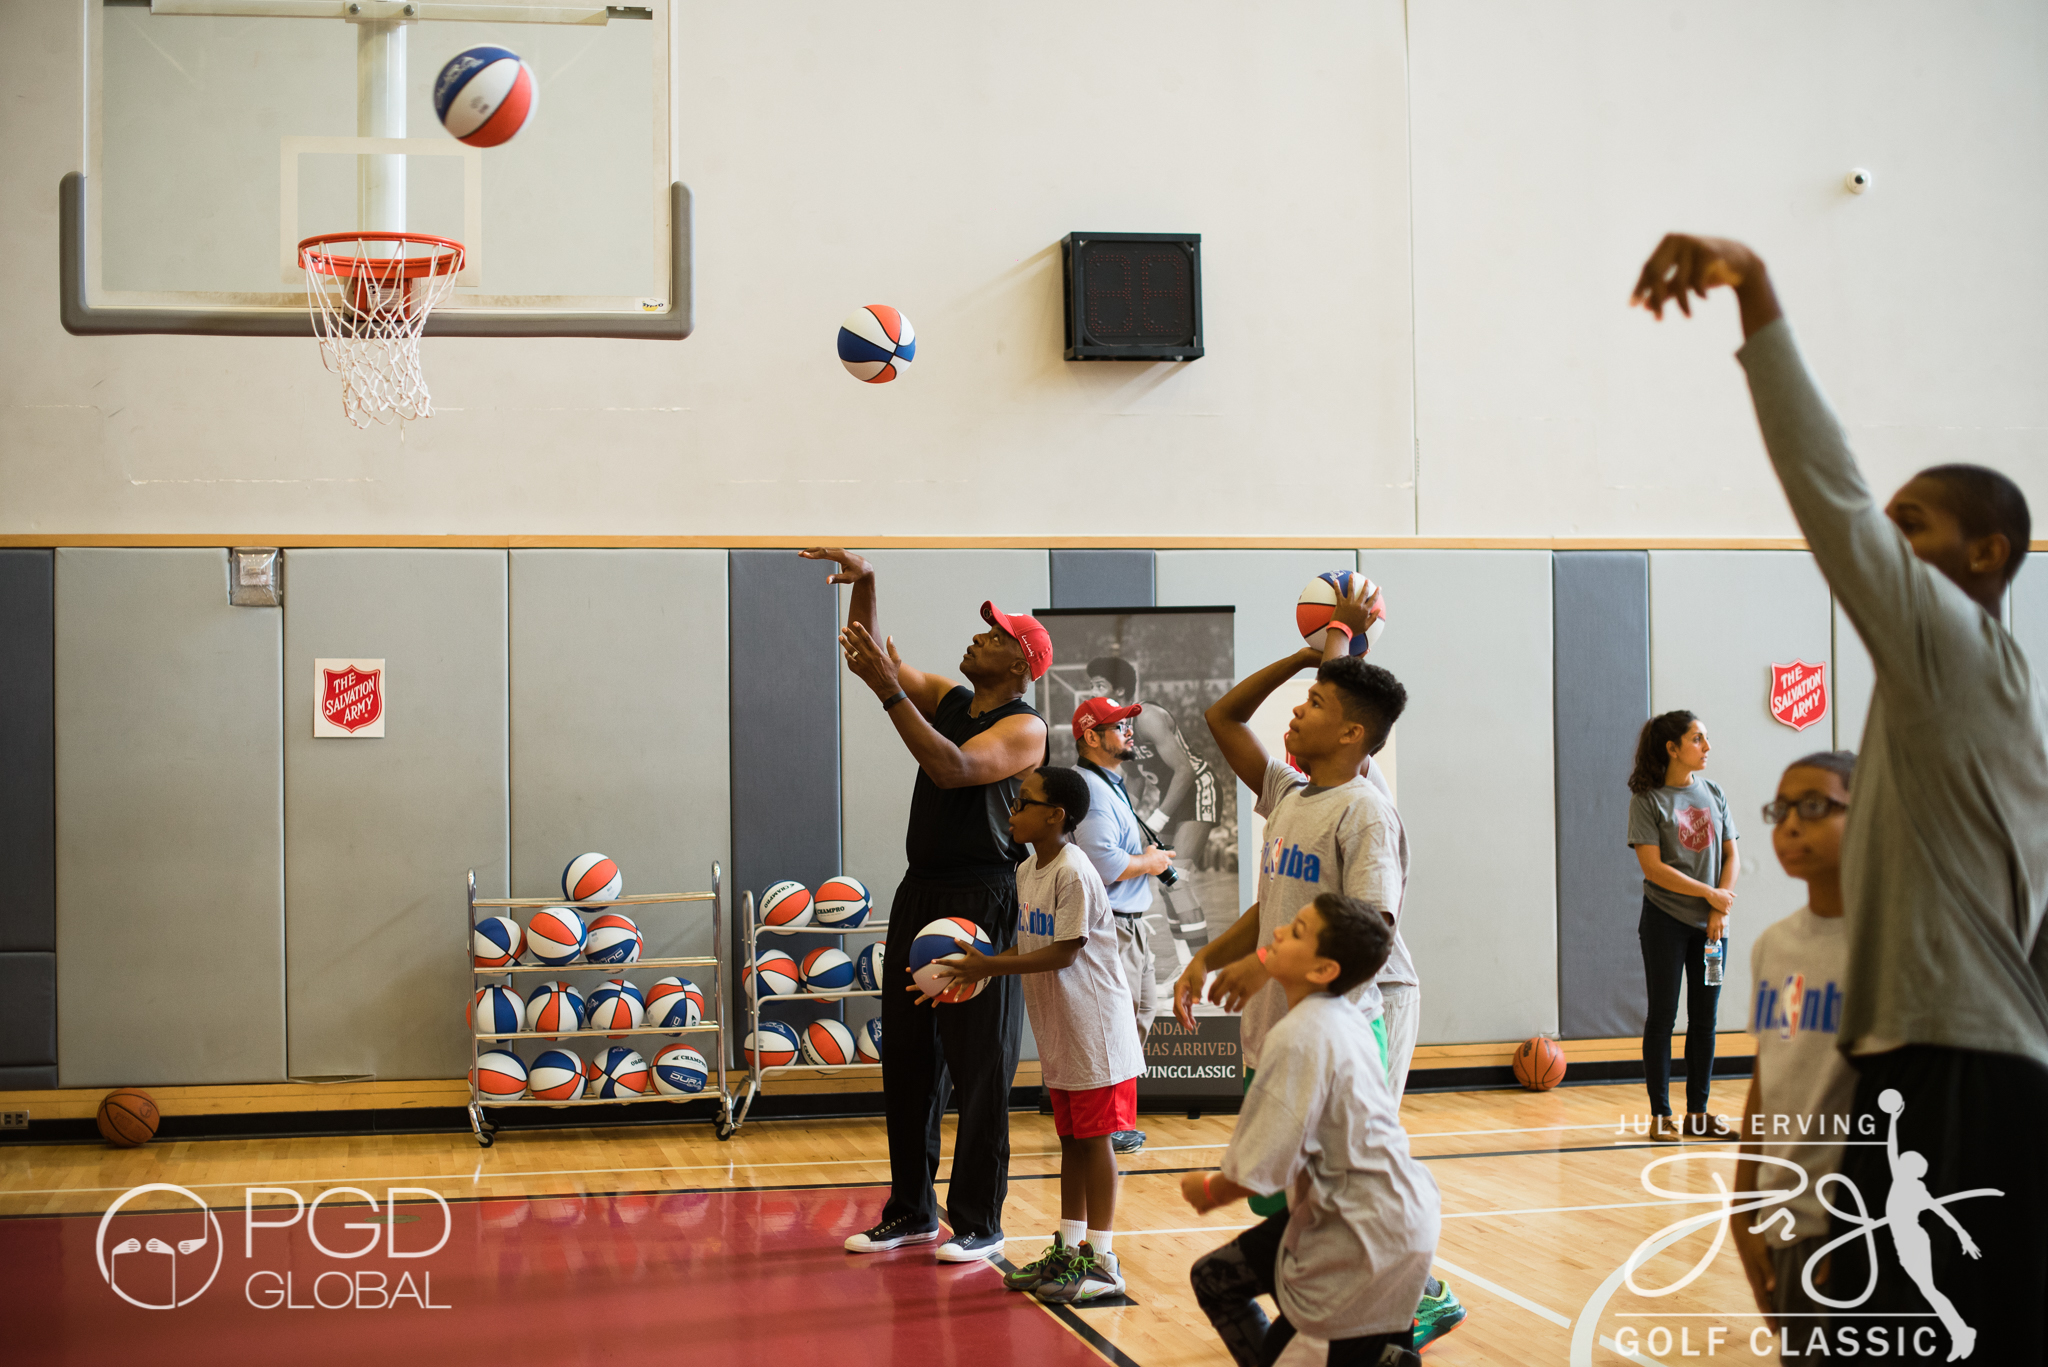 Julius Erving shoots hoops with the kids after they all received an ABA style basketball from Grab A Ball & Play